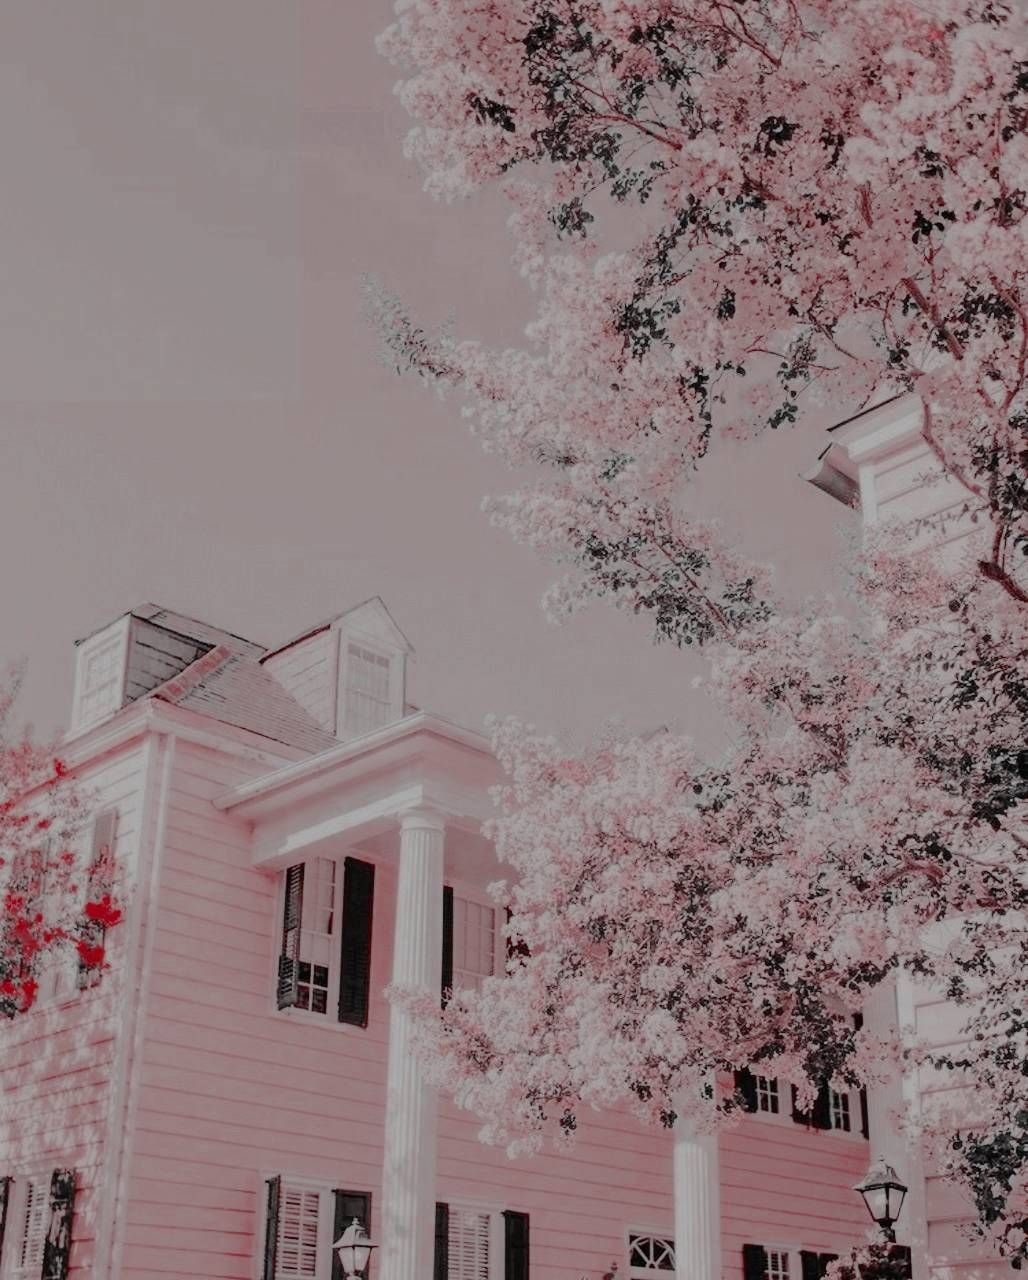 A pink house with a tree in front of it - Korean